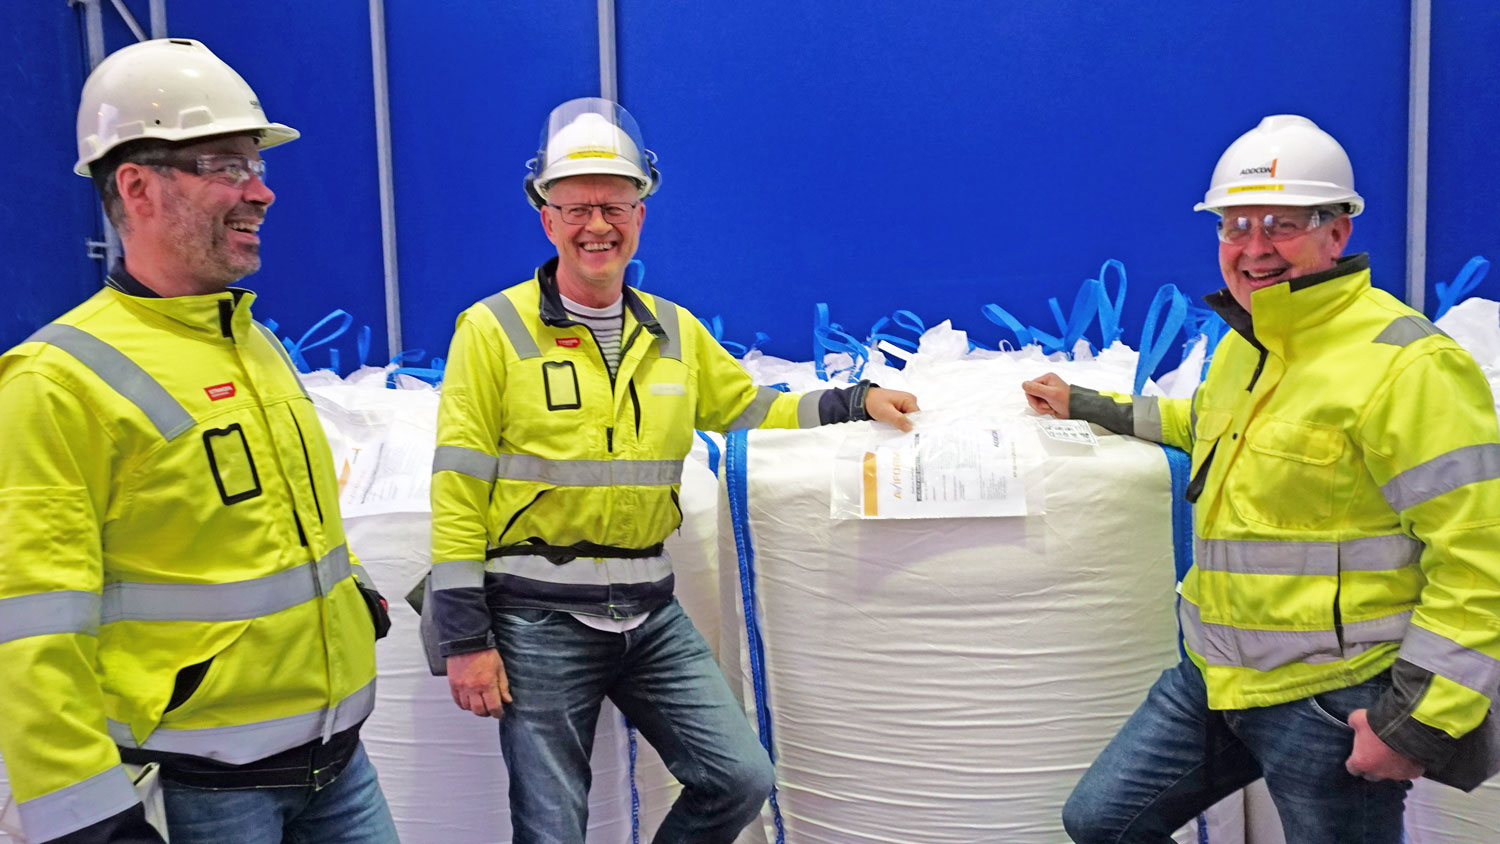 three men posing, wearing PPE, standing close to big bags of products, all smiling.